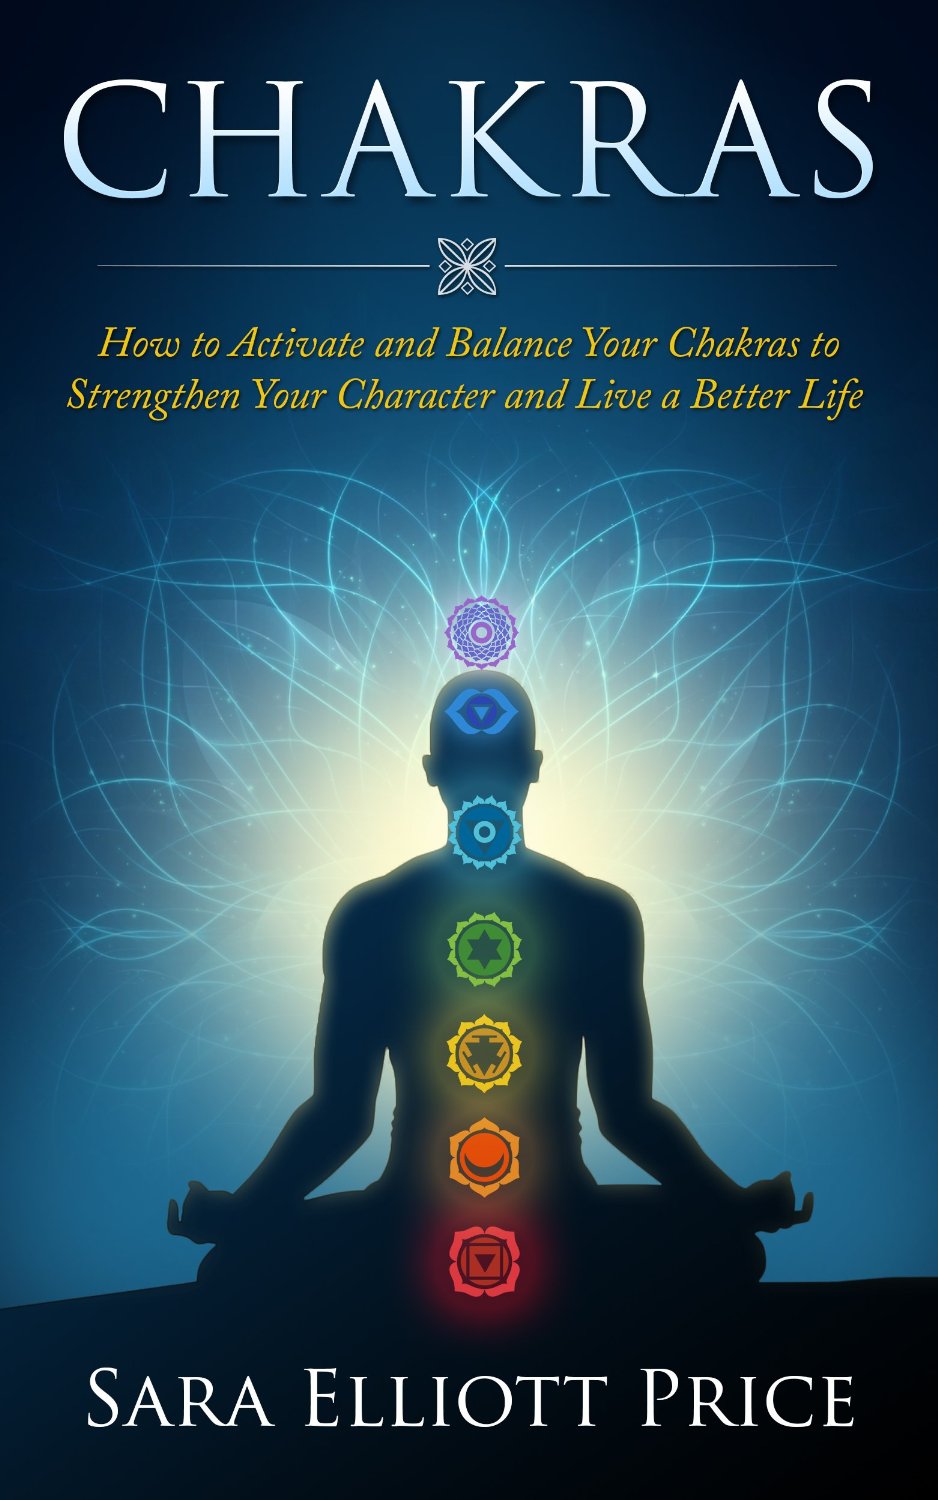 FREE: Chakras: How to Activate and Balance Your Chakras to Strengthen Your Character and Live a Better Life by Sara Elliott Price